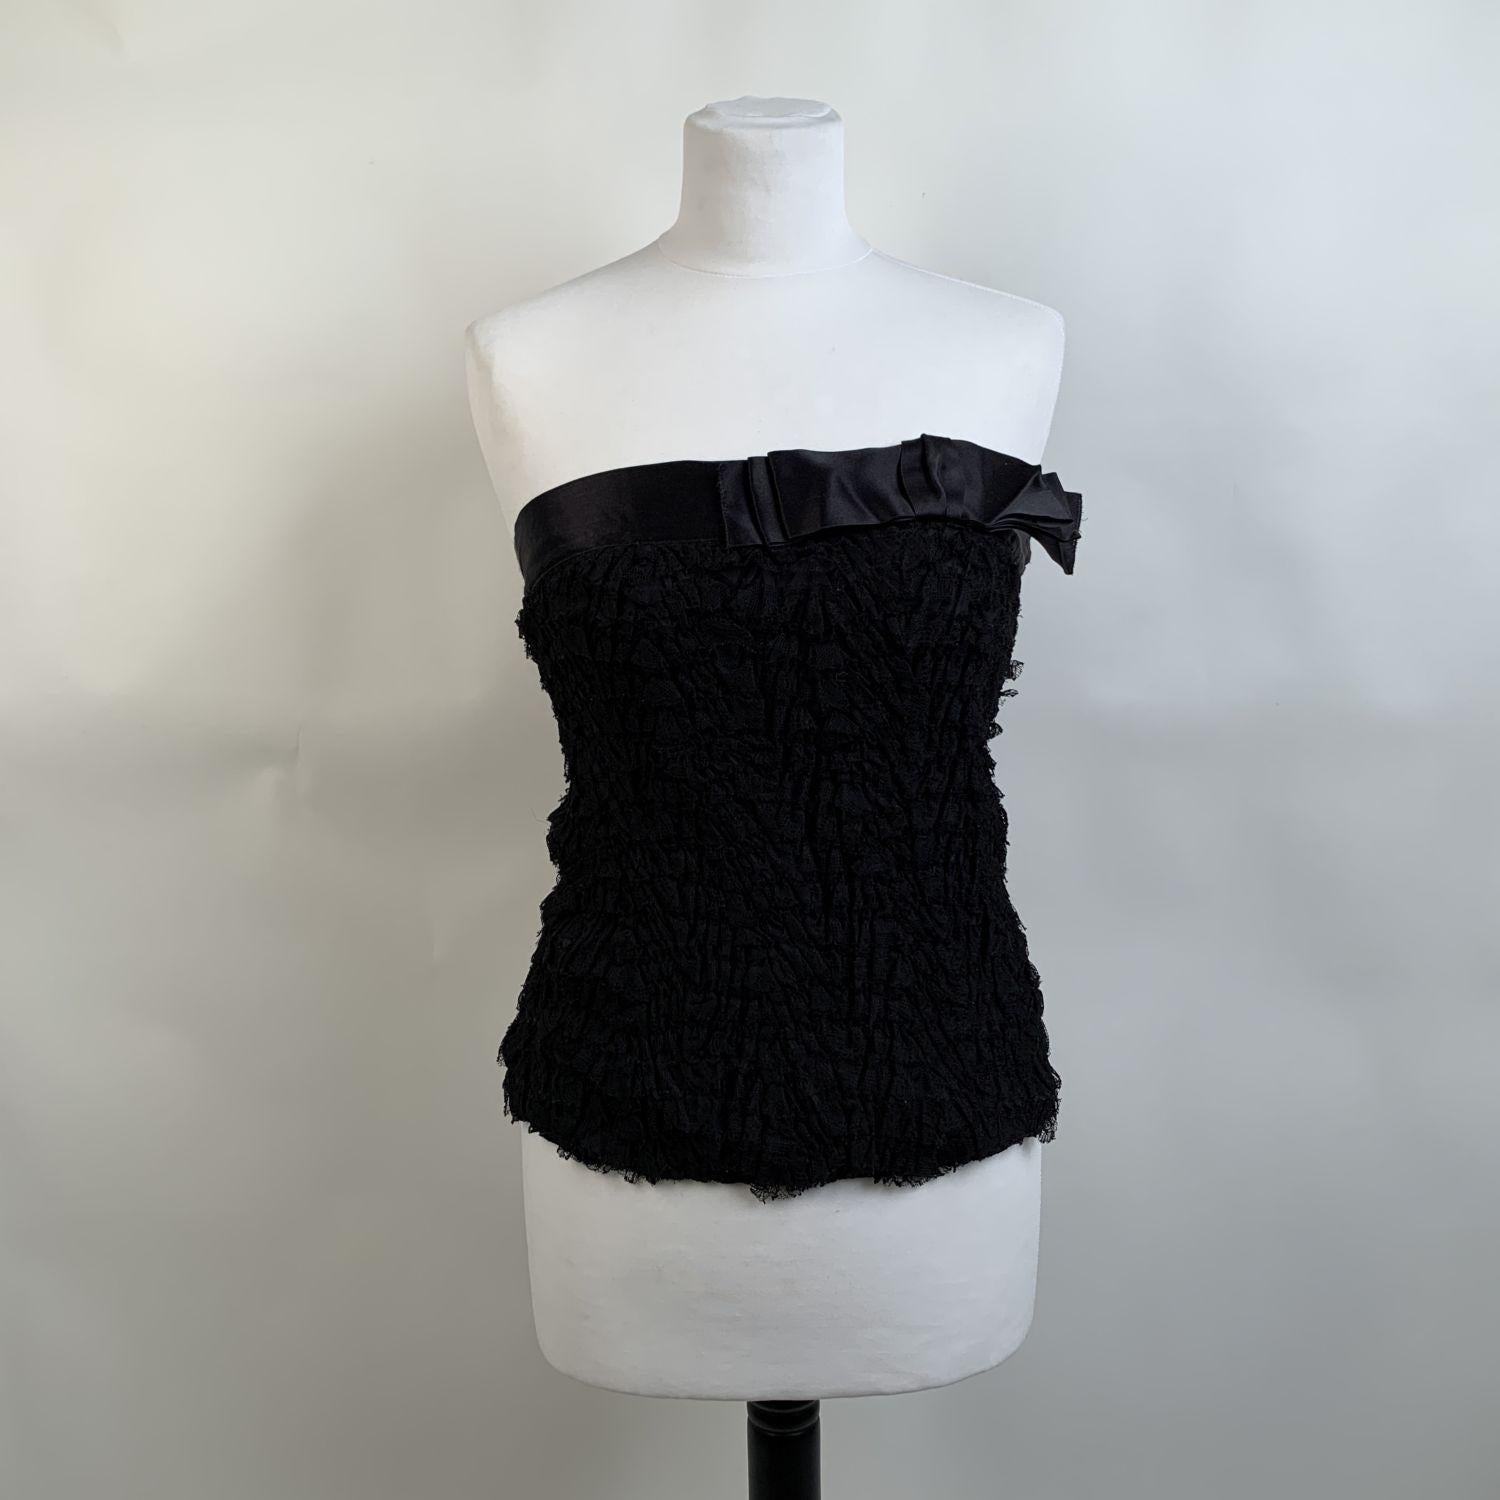 Prada bustier top in black color, with allover lace applications. Bow detailing on the neckline. Side button and hook and eye closures. Composition: 100% Silk. Application: 47% Nylon, 53% Viscose. Trimmings: 100% Silk. Size 40 IT (it should